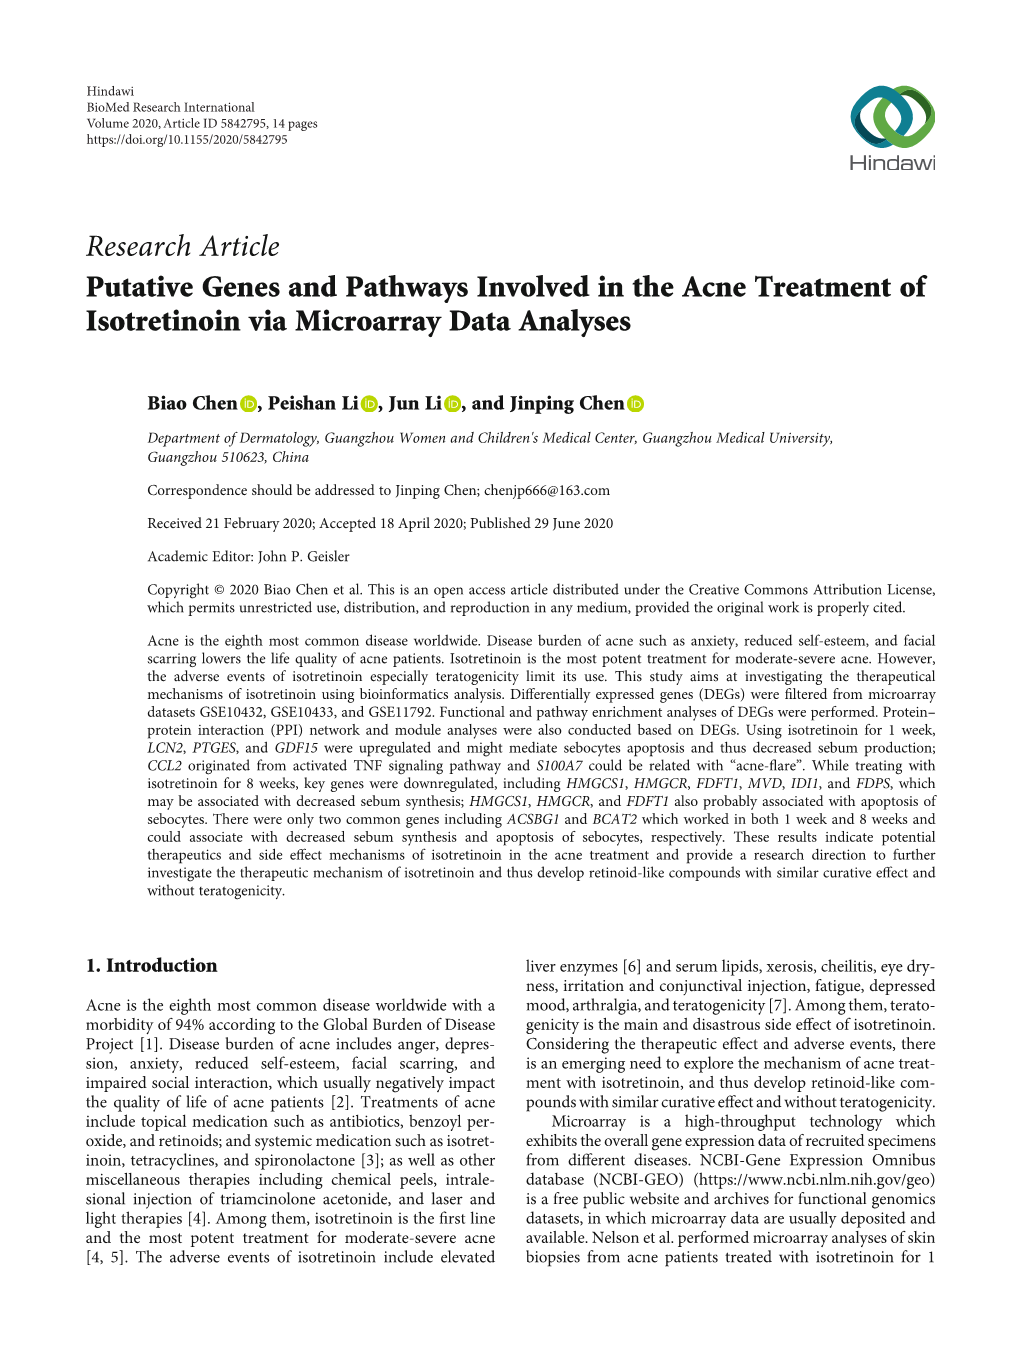 Putative Genes and Pathways Involved in the Acne Treatment of Isotretinoin Via Microarray Data Analyses